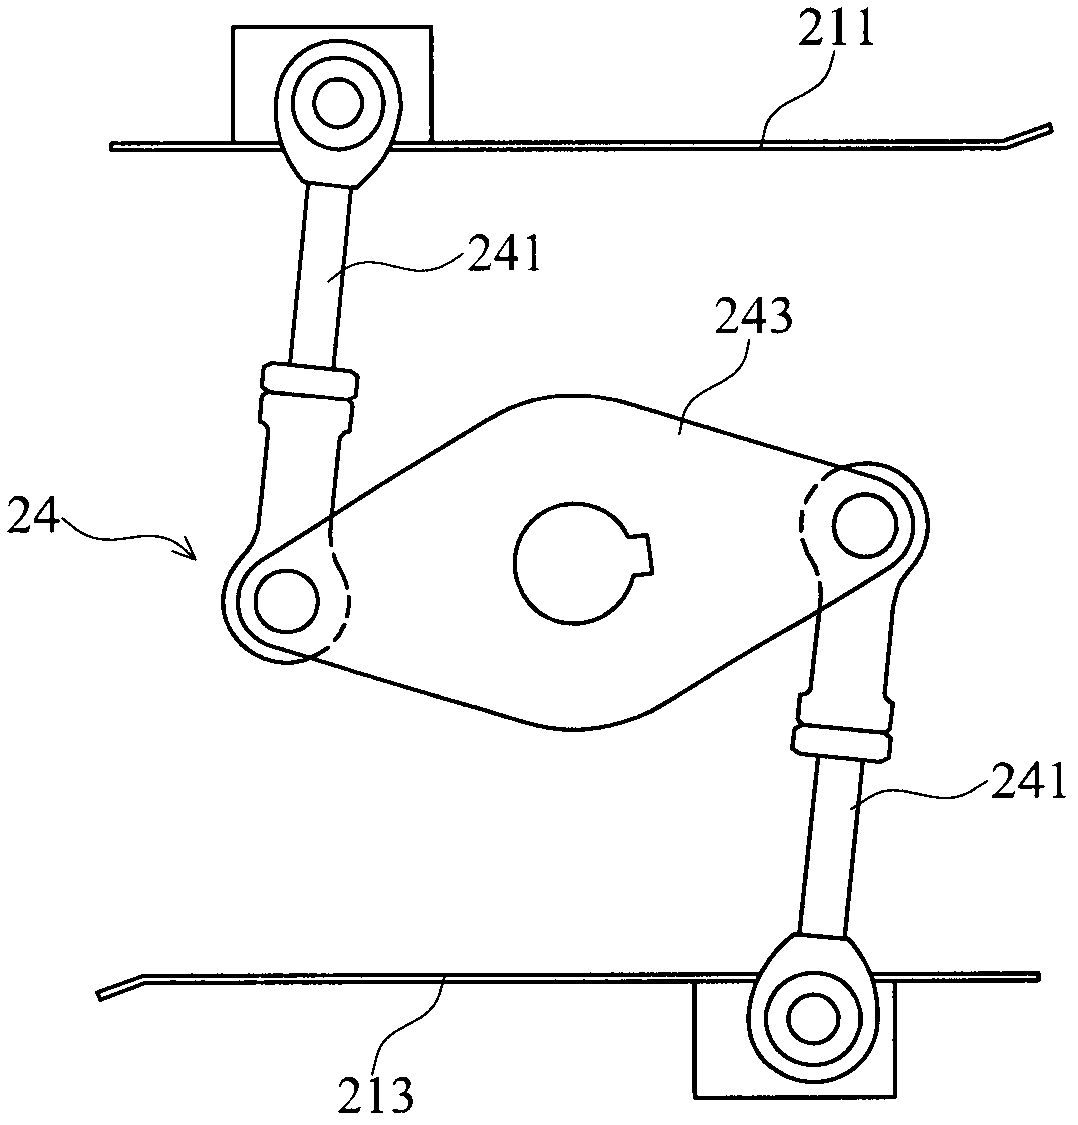 Clamping and turning device